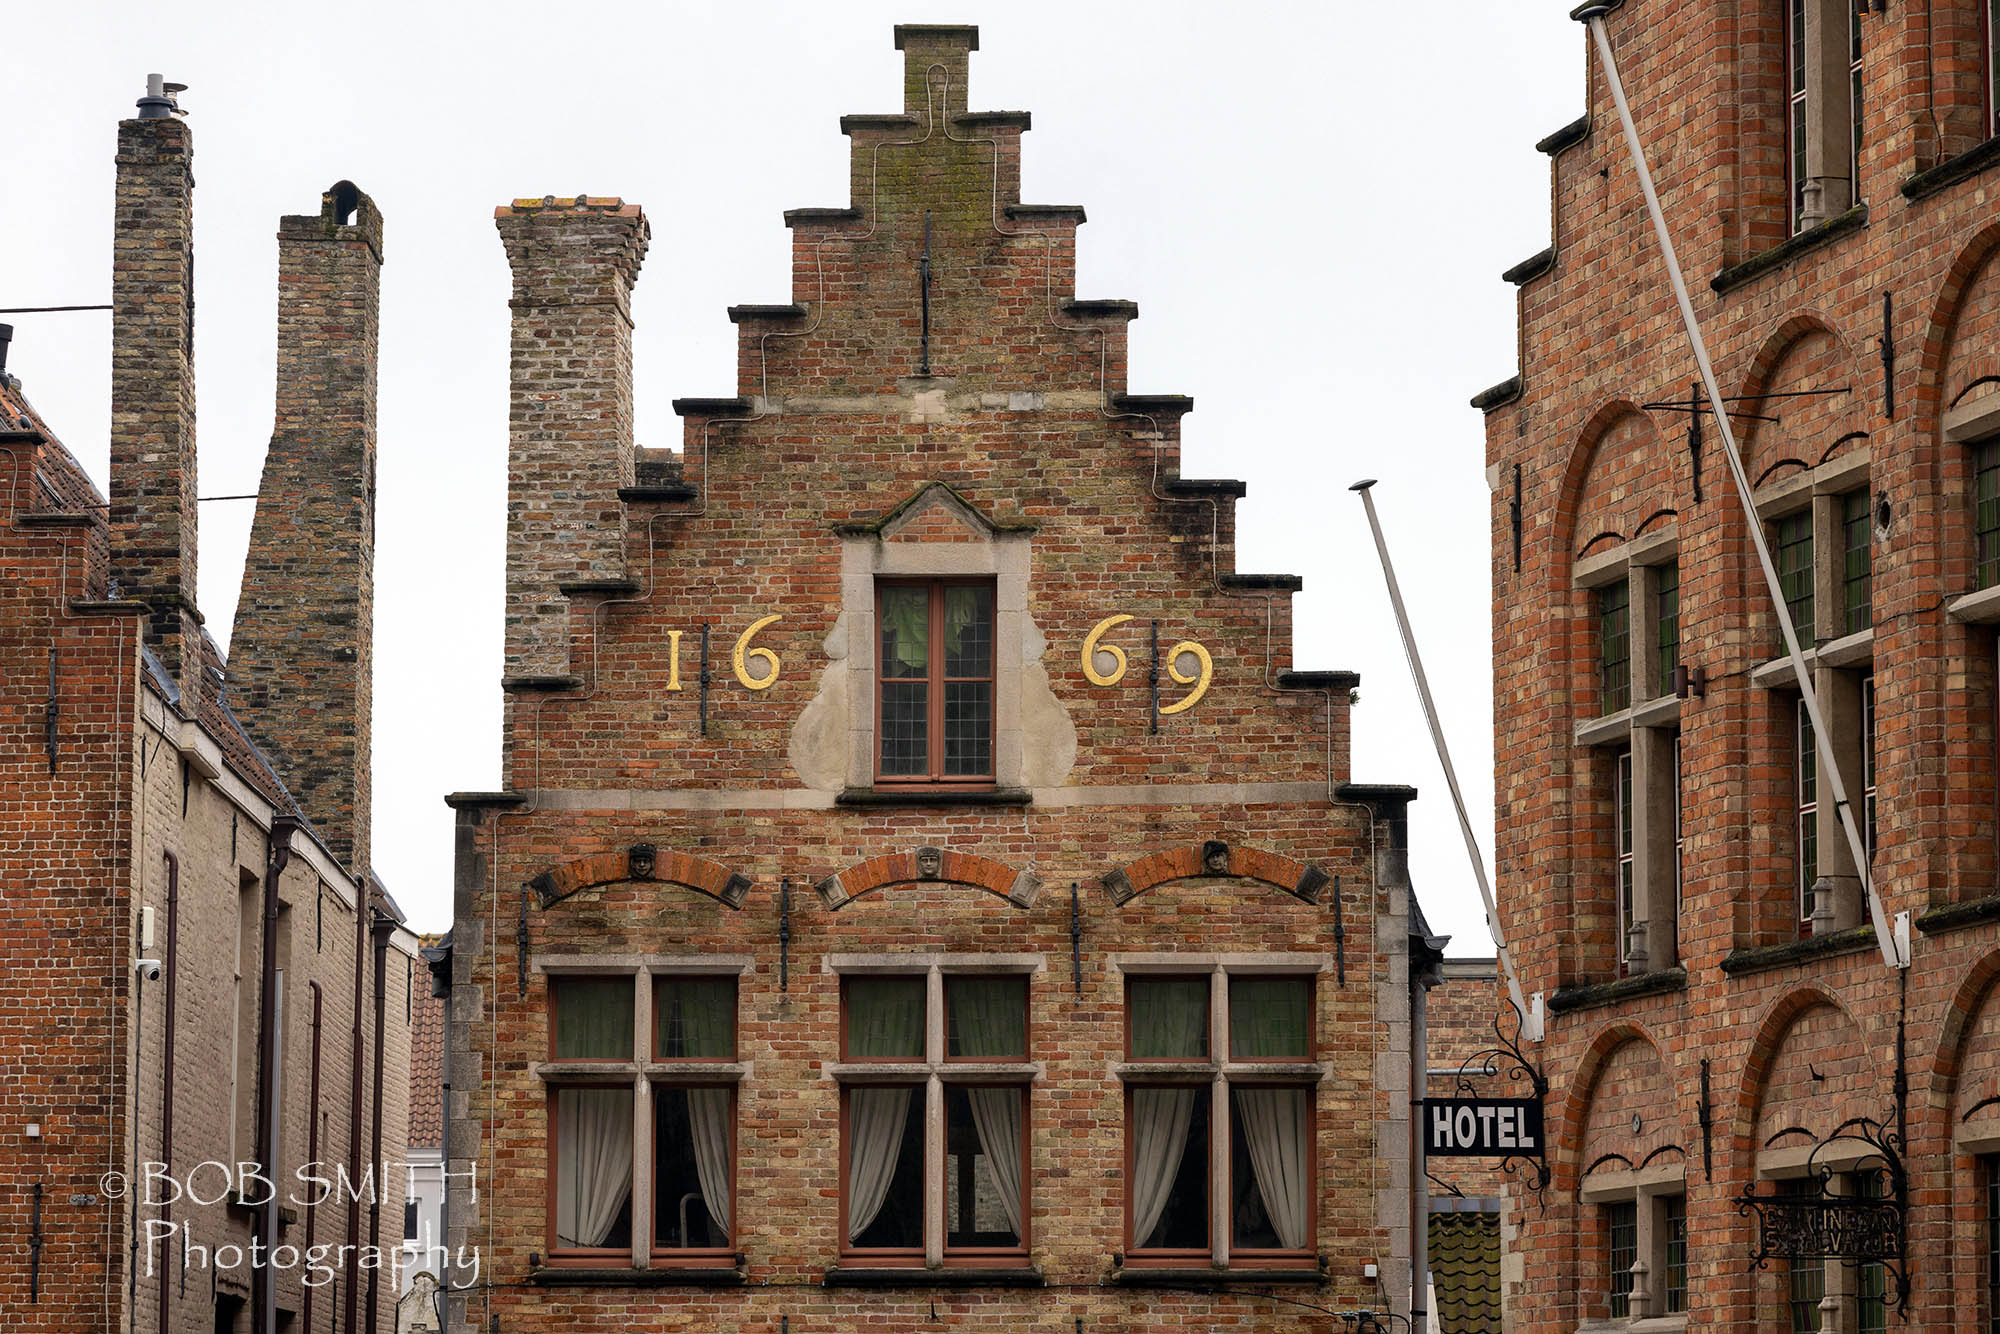 The distinctive crow-stepped gables of buildings in Bruges, Flanders, Belgium